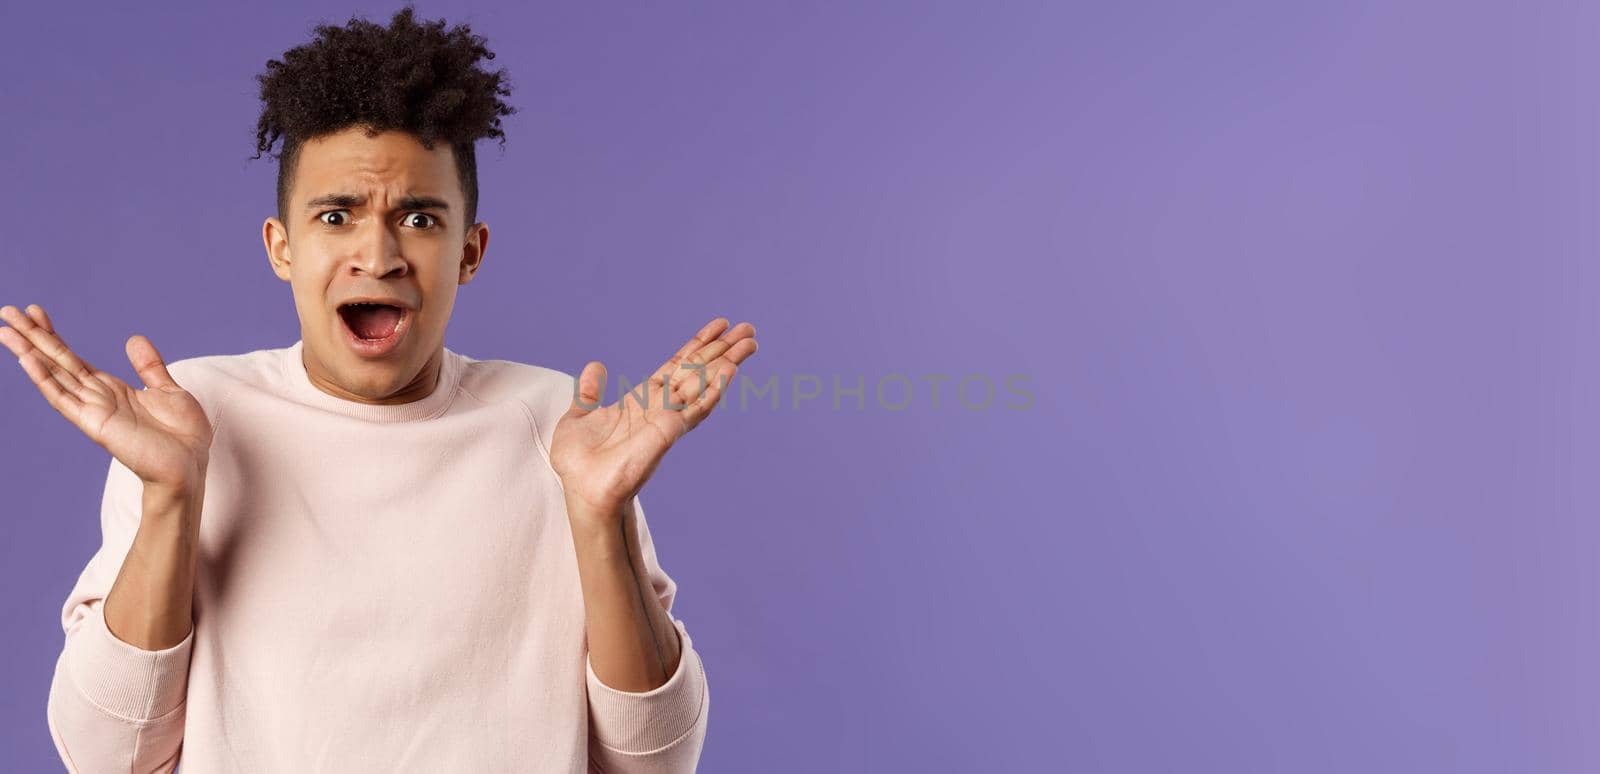 Close-up portrait of displeased, bothered frustrated hispanic man spread hands sideways in dismay and confusion, staring camera upset with disappointed grimacing expression, purple background.